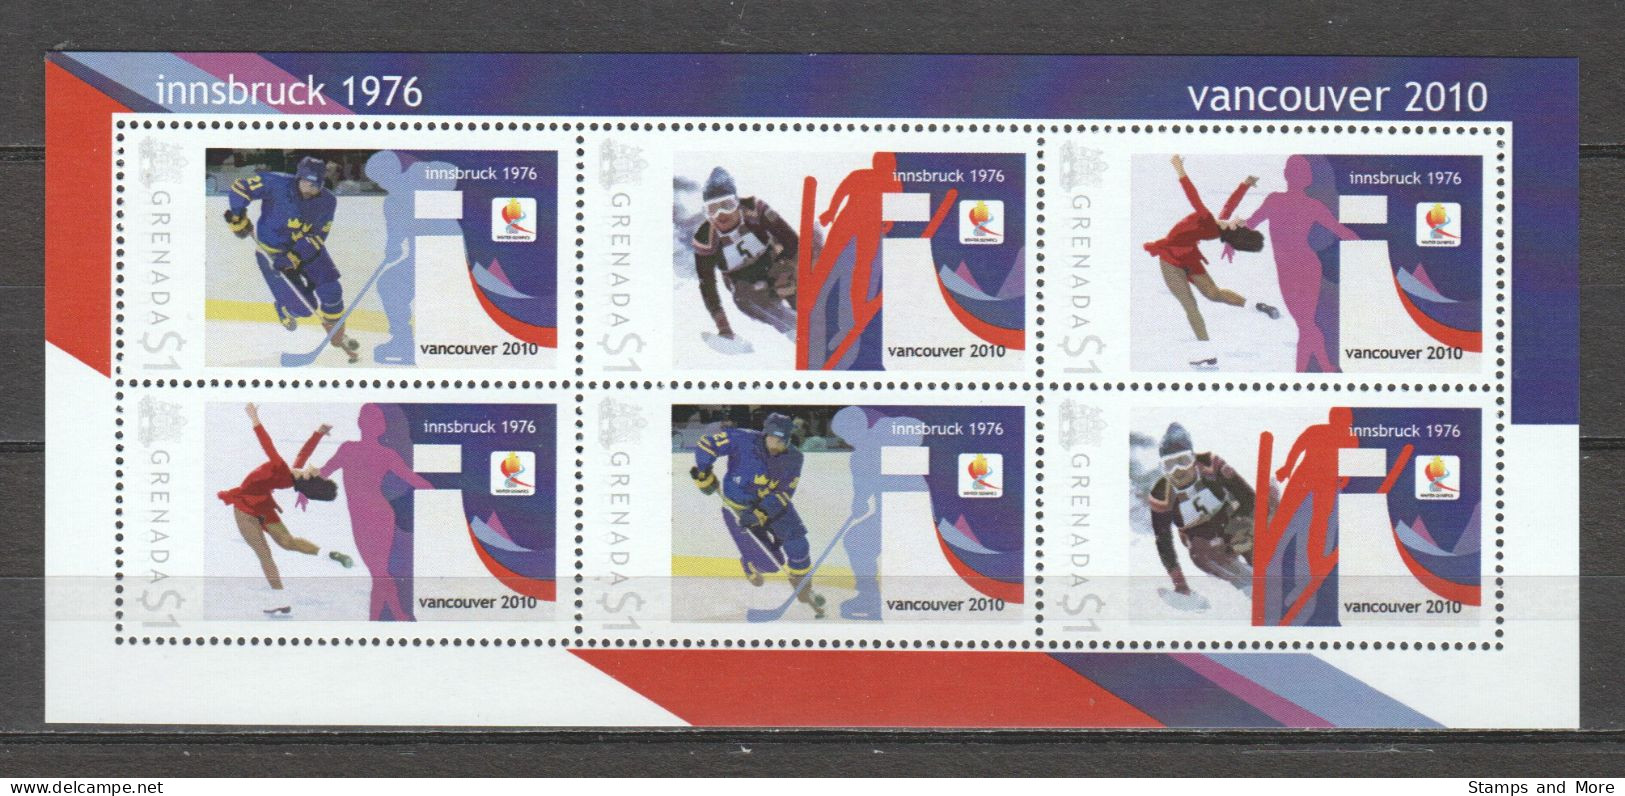 Grenada - Limited Edition Sheet 12 MNH - WINTER OLYMPICS VANCOUVER 2010 - INNSBRUCK 1976 - Hiver 2010: Vancouver